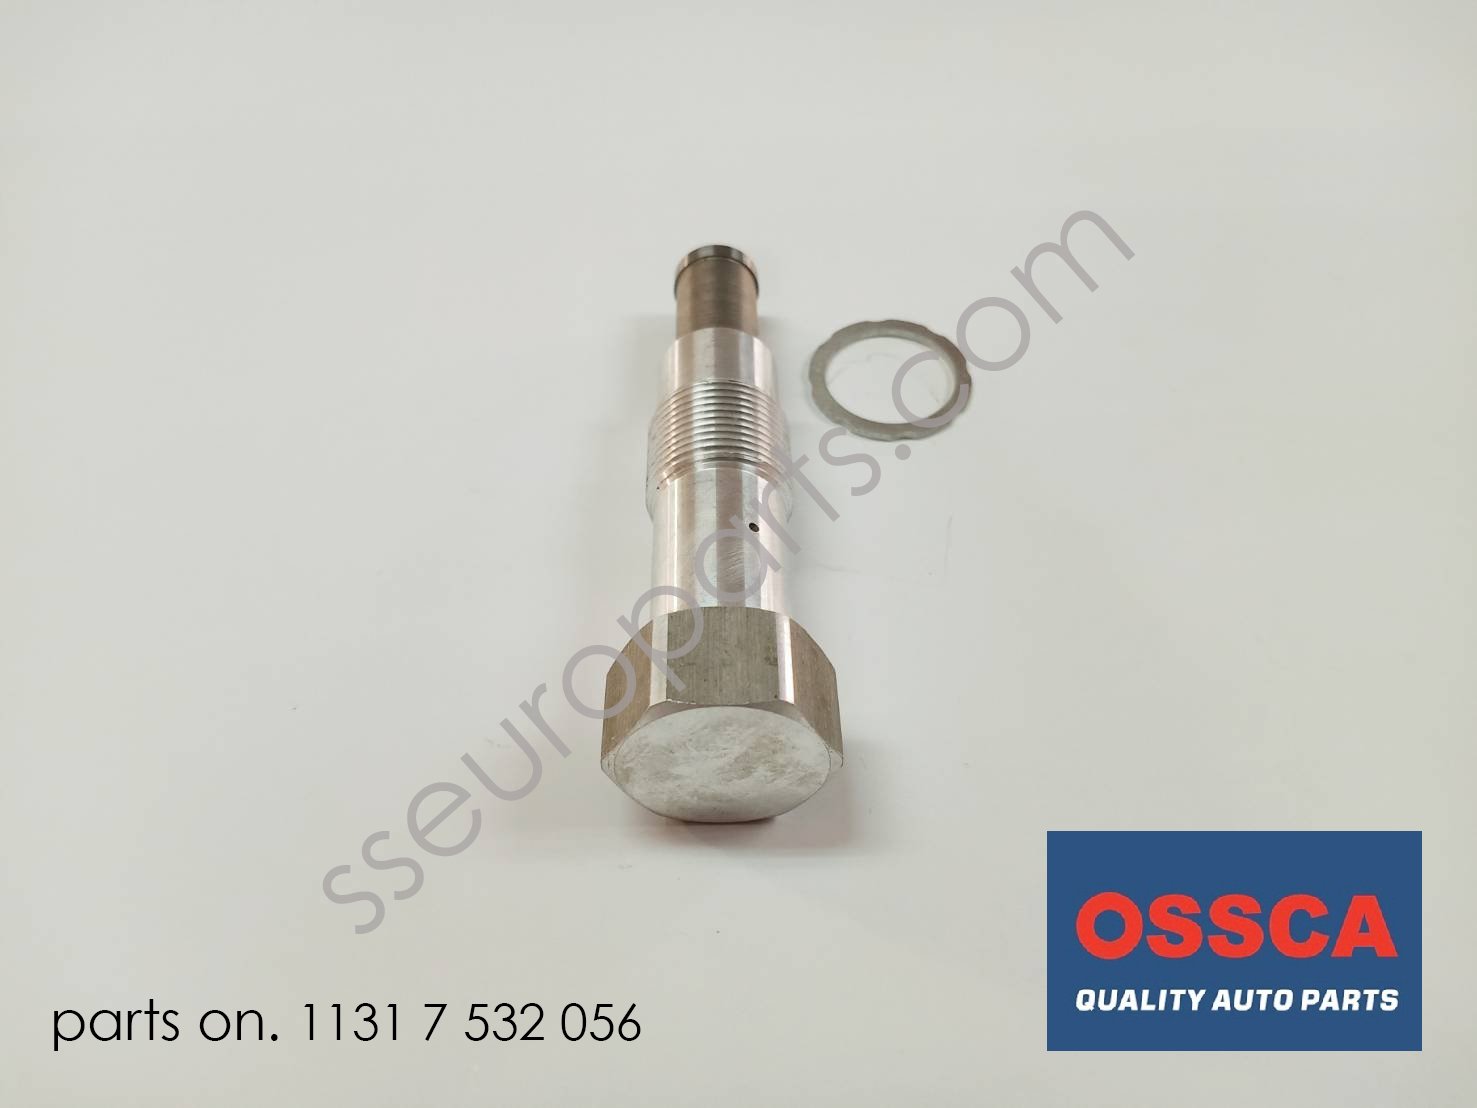 Chain tensioner Part number: 11317584723 7584723 , 11317532056 7532056 OSSCA